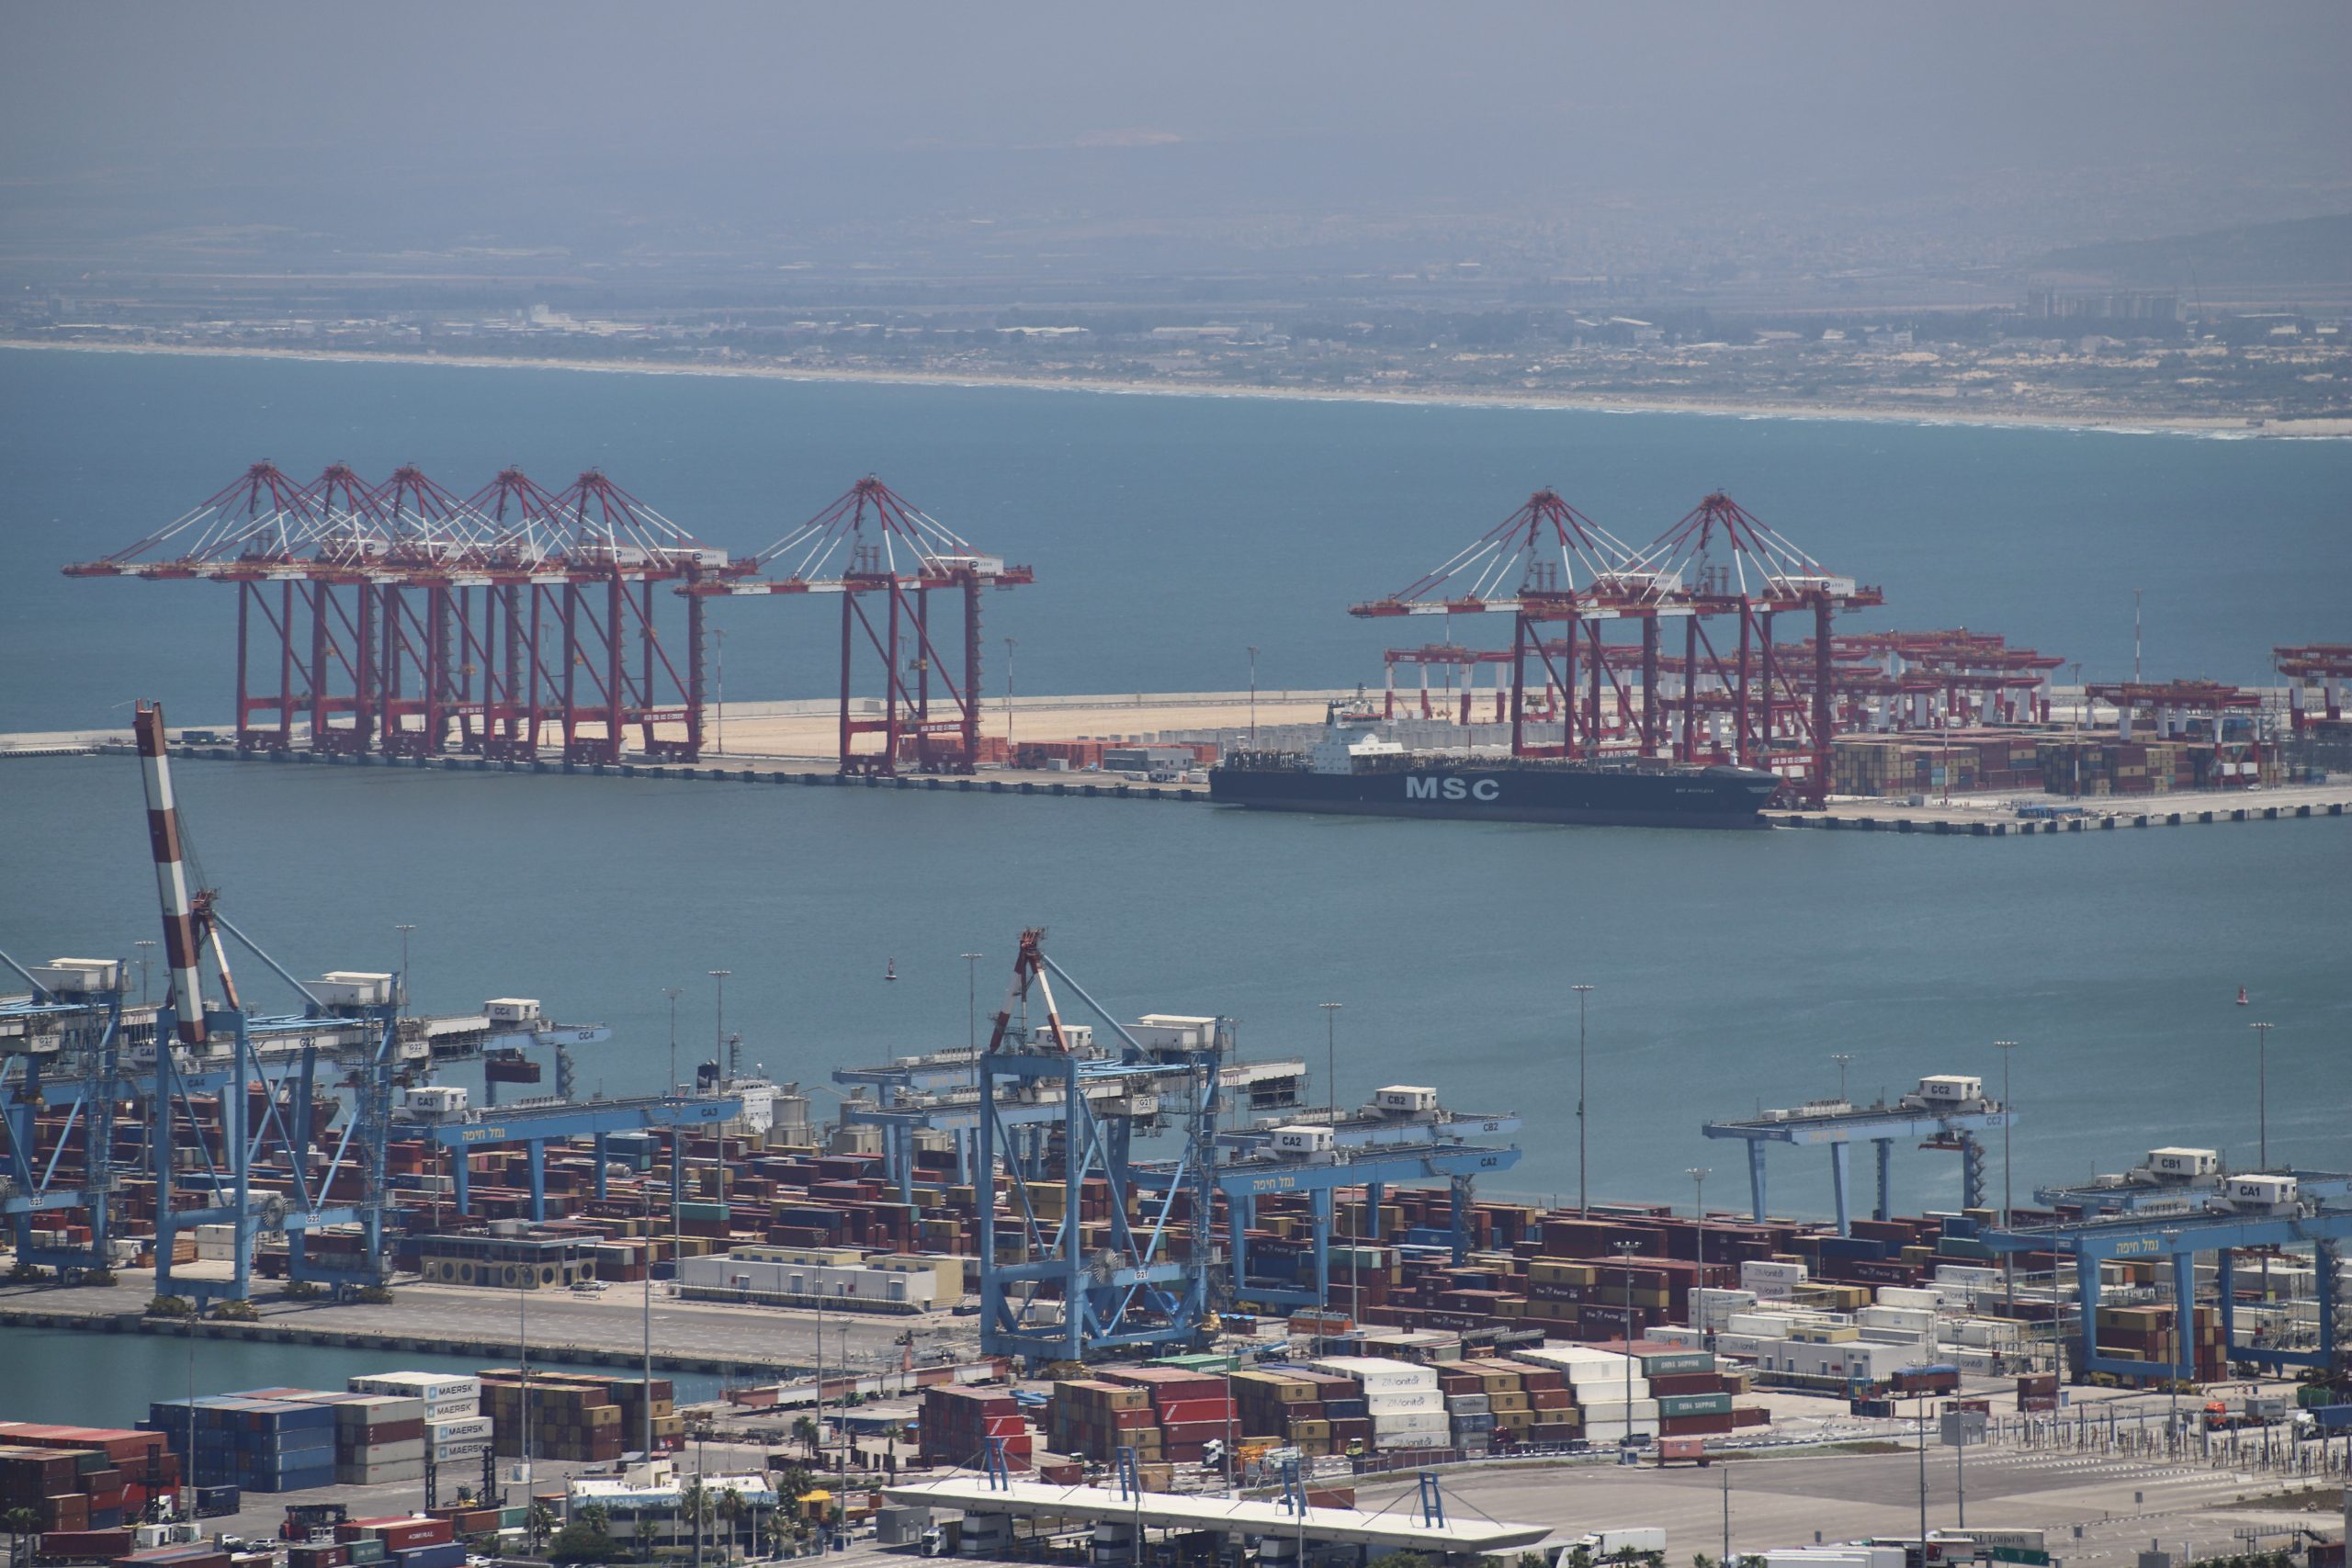 MSC Marylena is the first ship loaded in a new Bay Port in Haifa